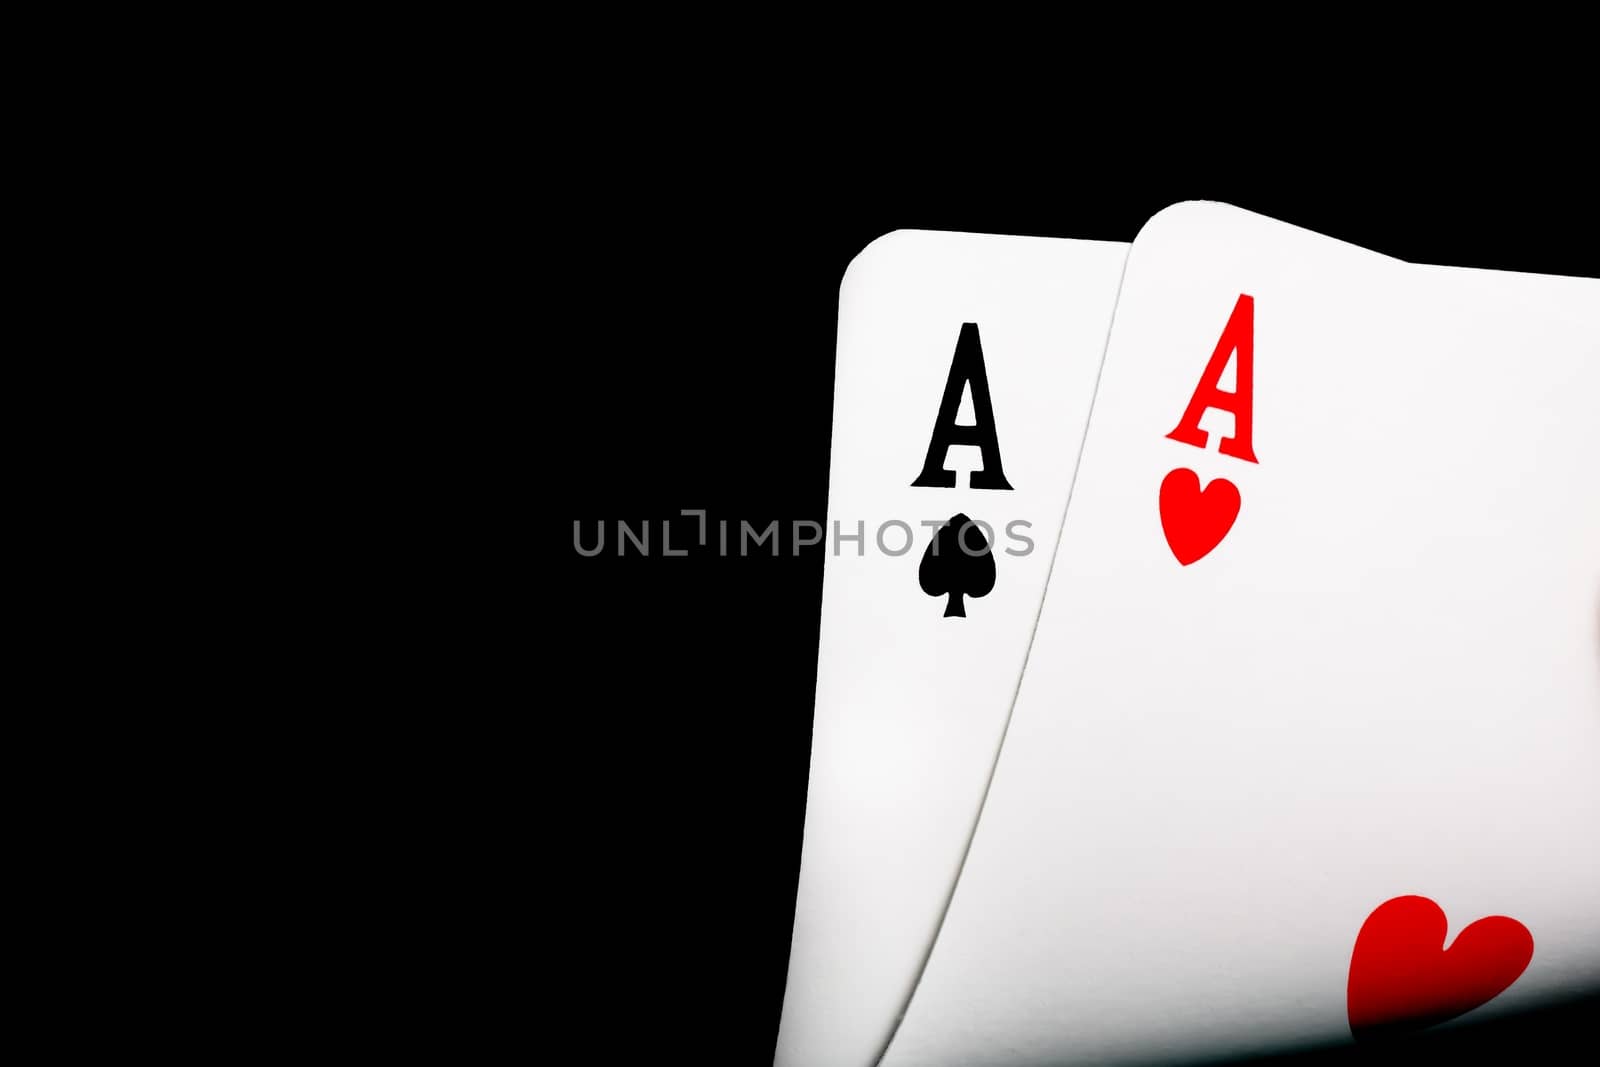 detail of winning aces on black background